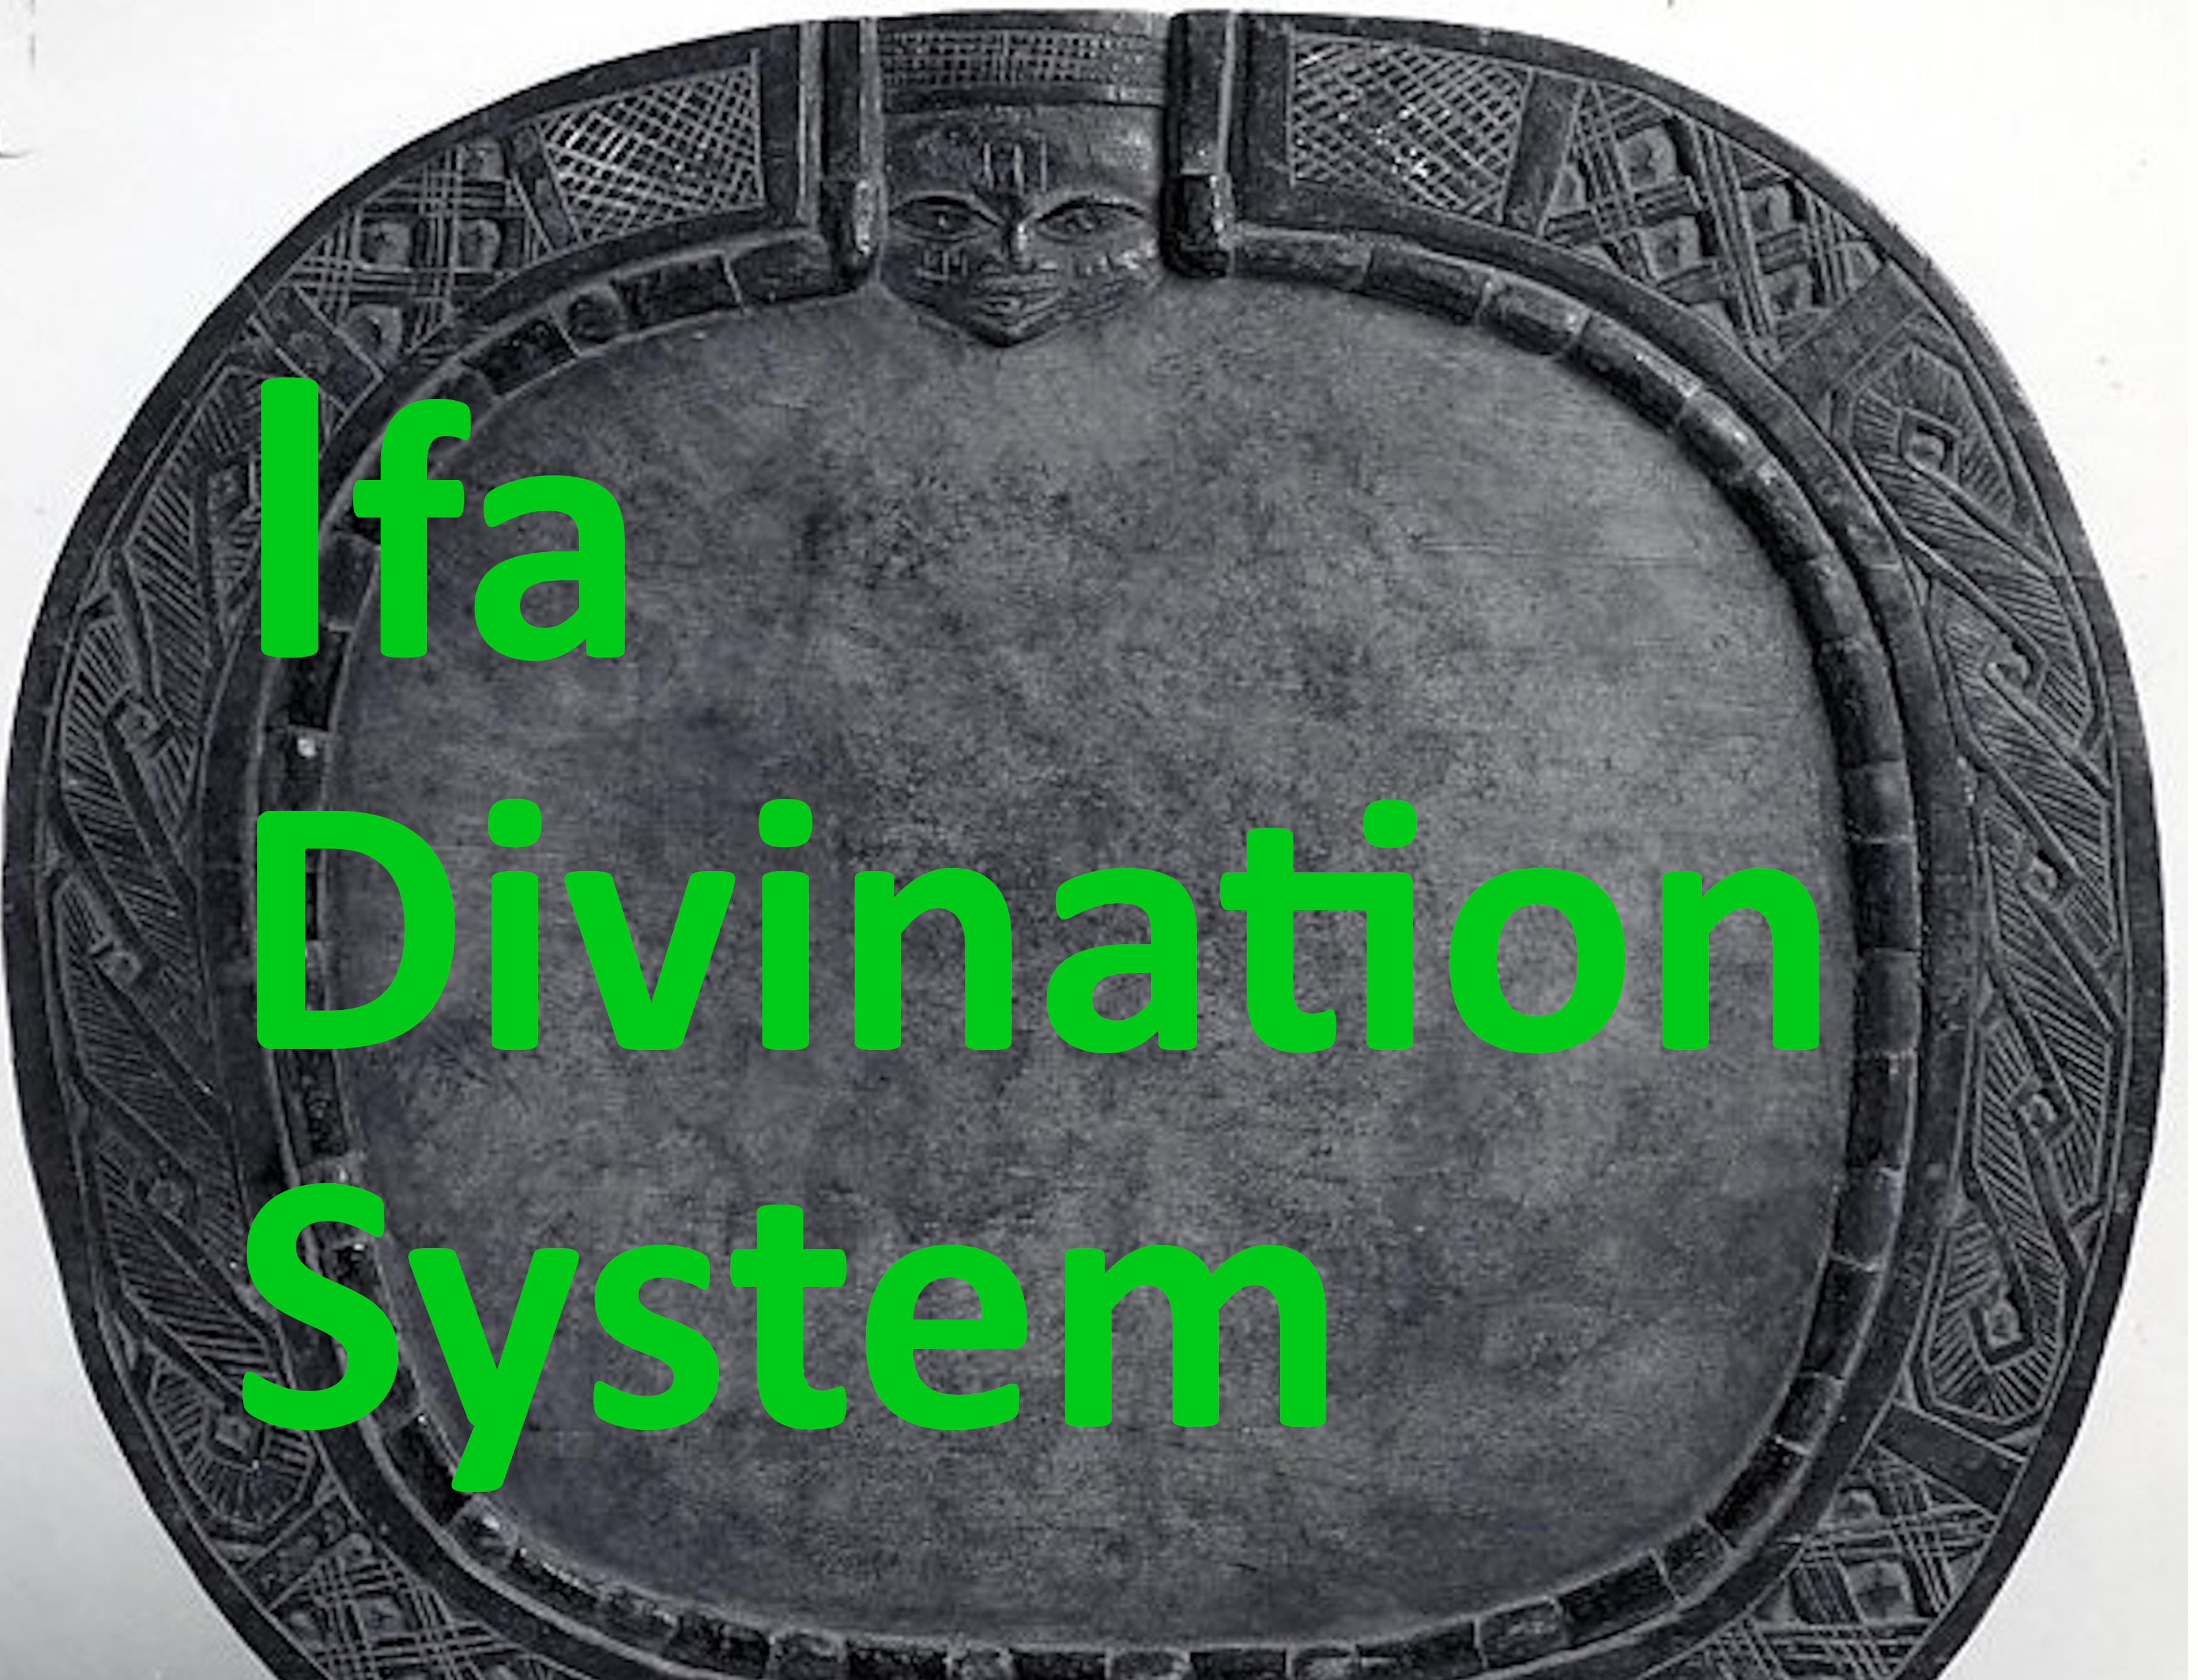 ifa divination system